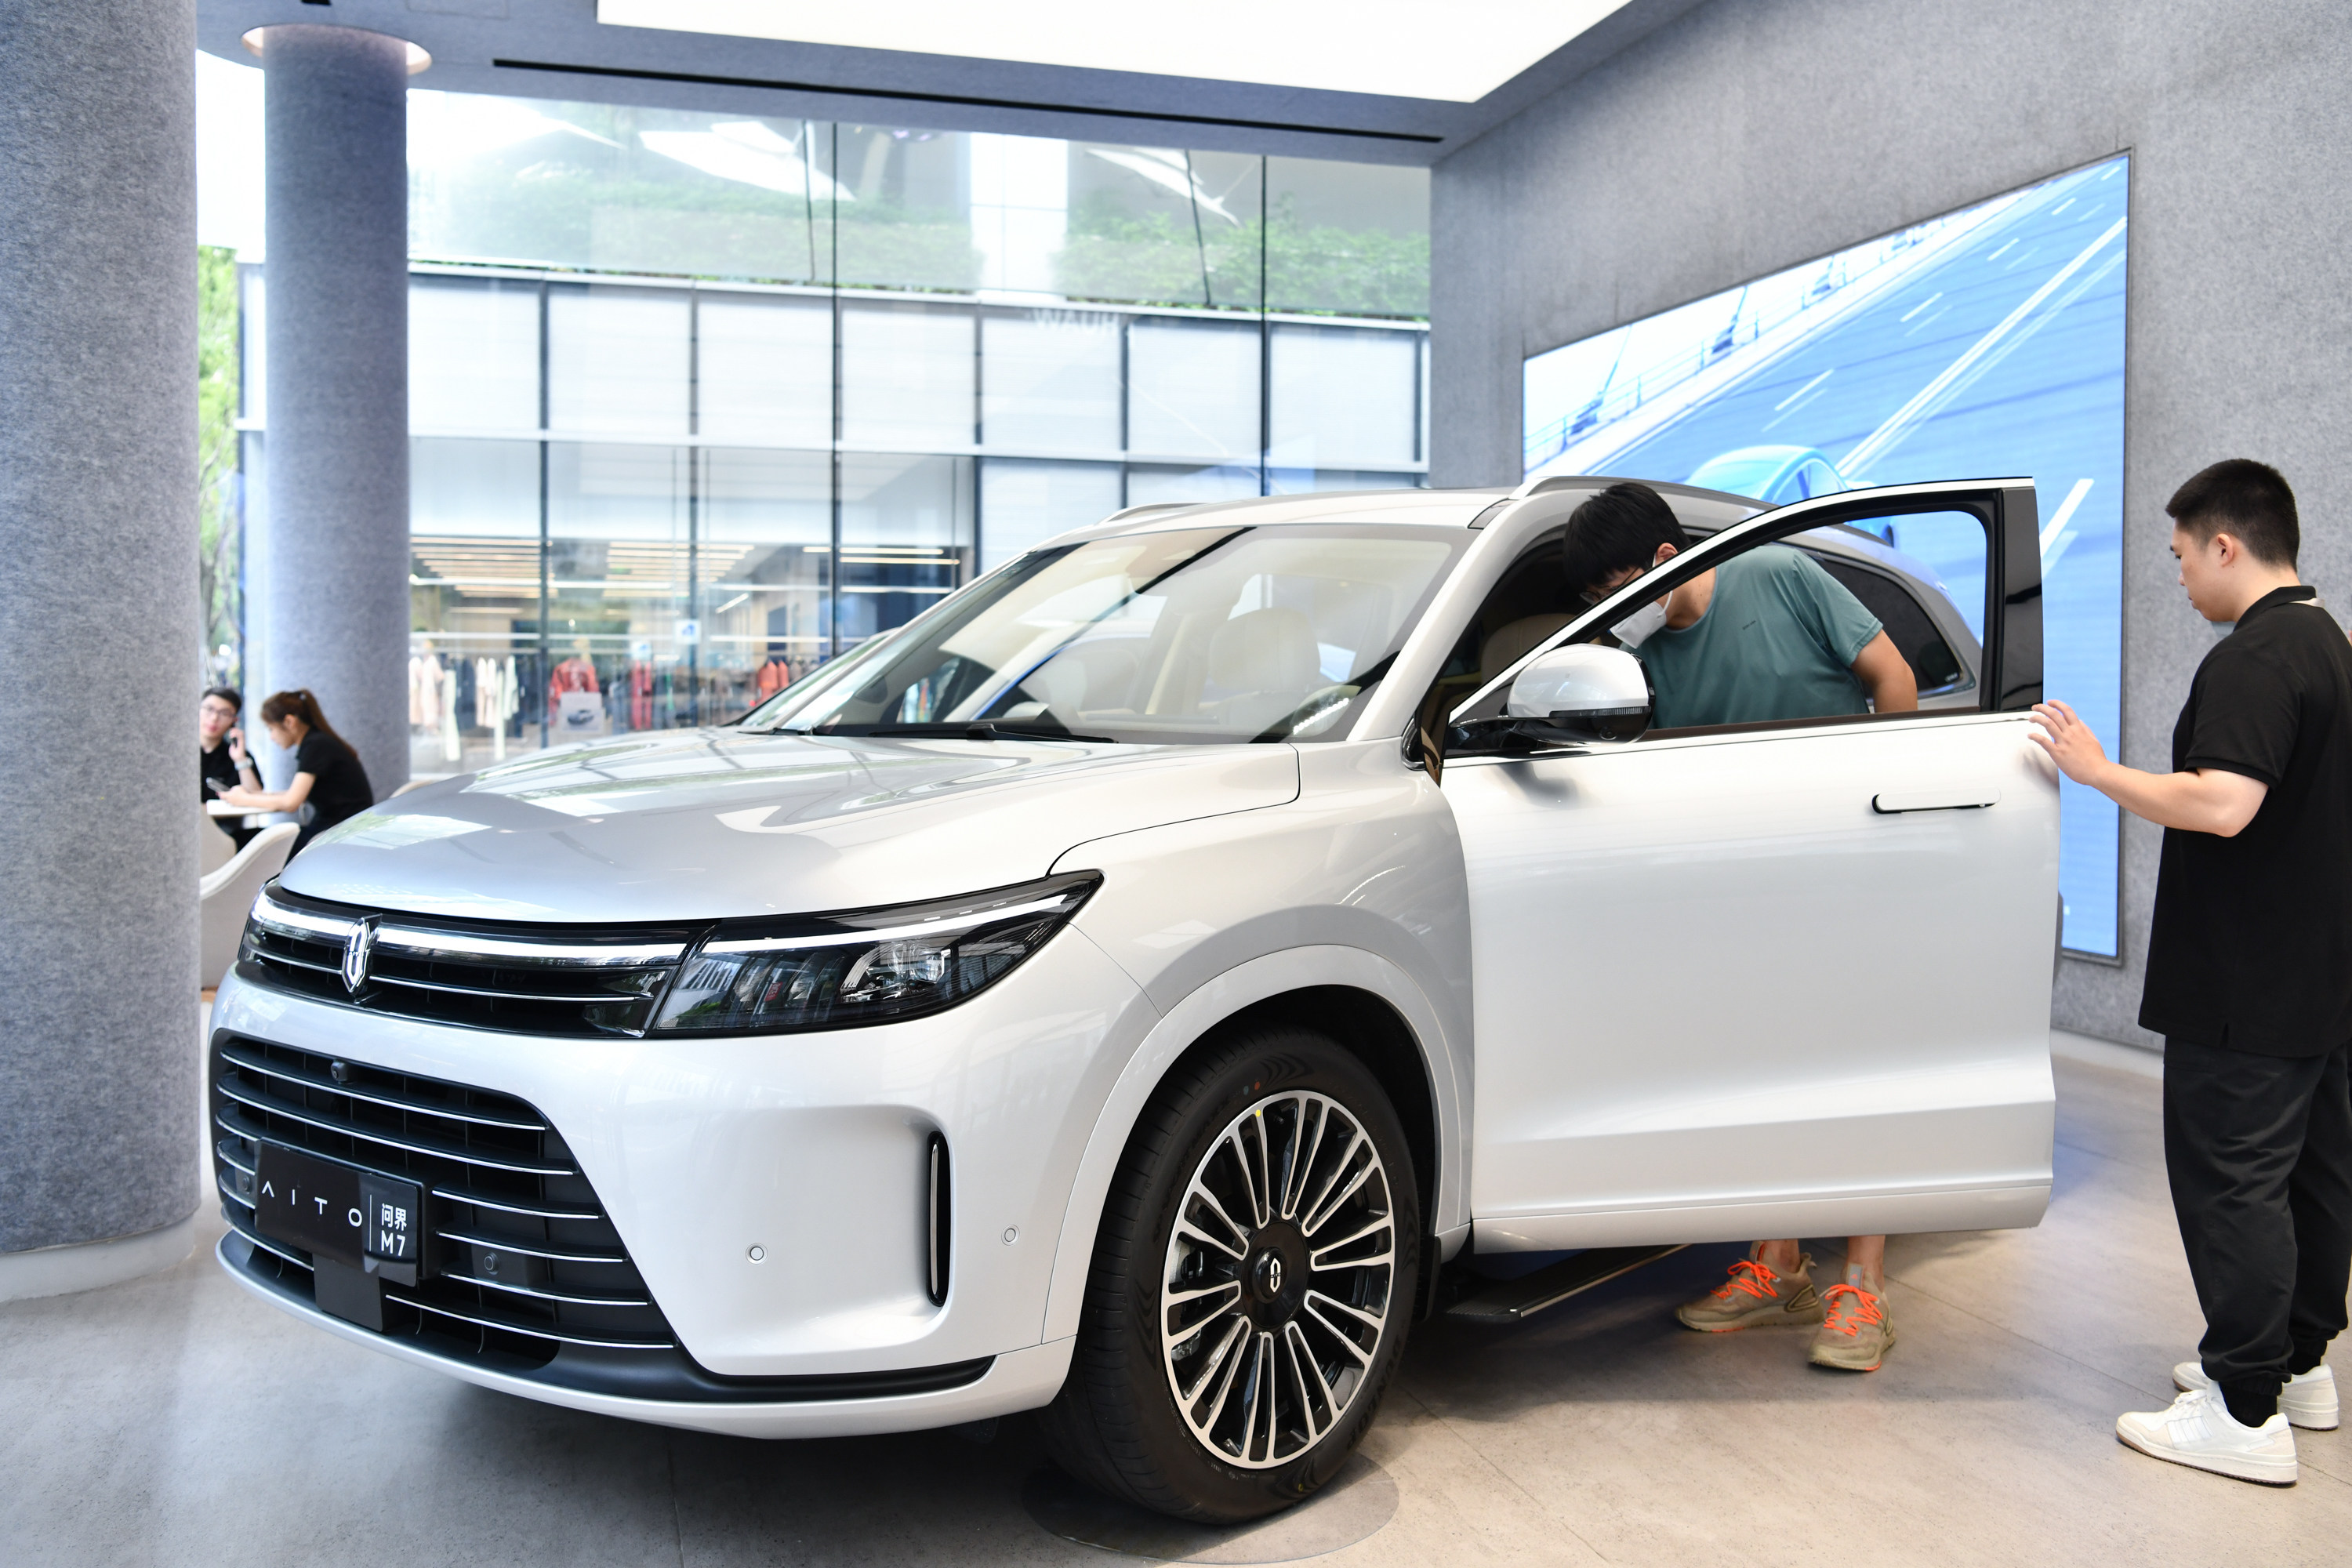 Car shoppers check out the Aito M7 at a Huawei store in Shenzhen, in south China’s Guangdong Province, on September 11, 2023. Photo: Xinhua